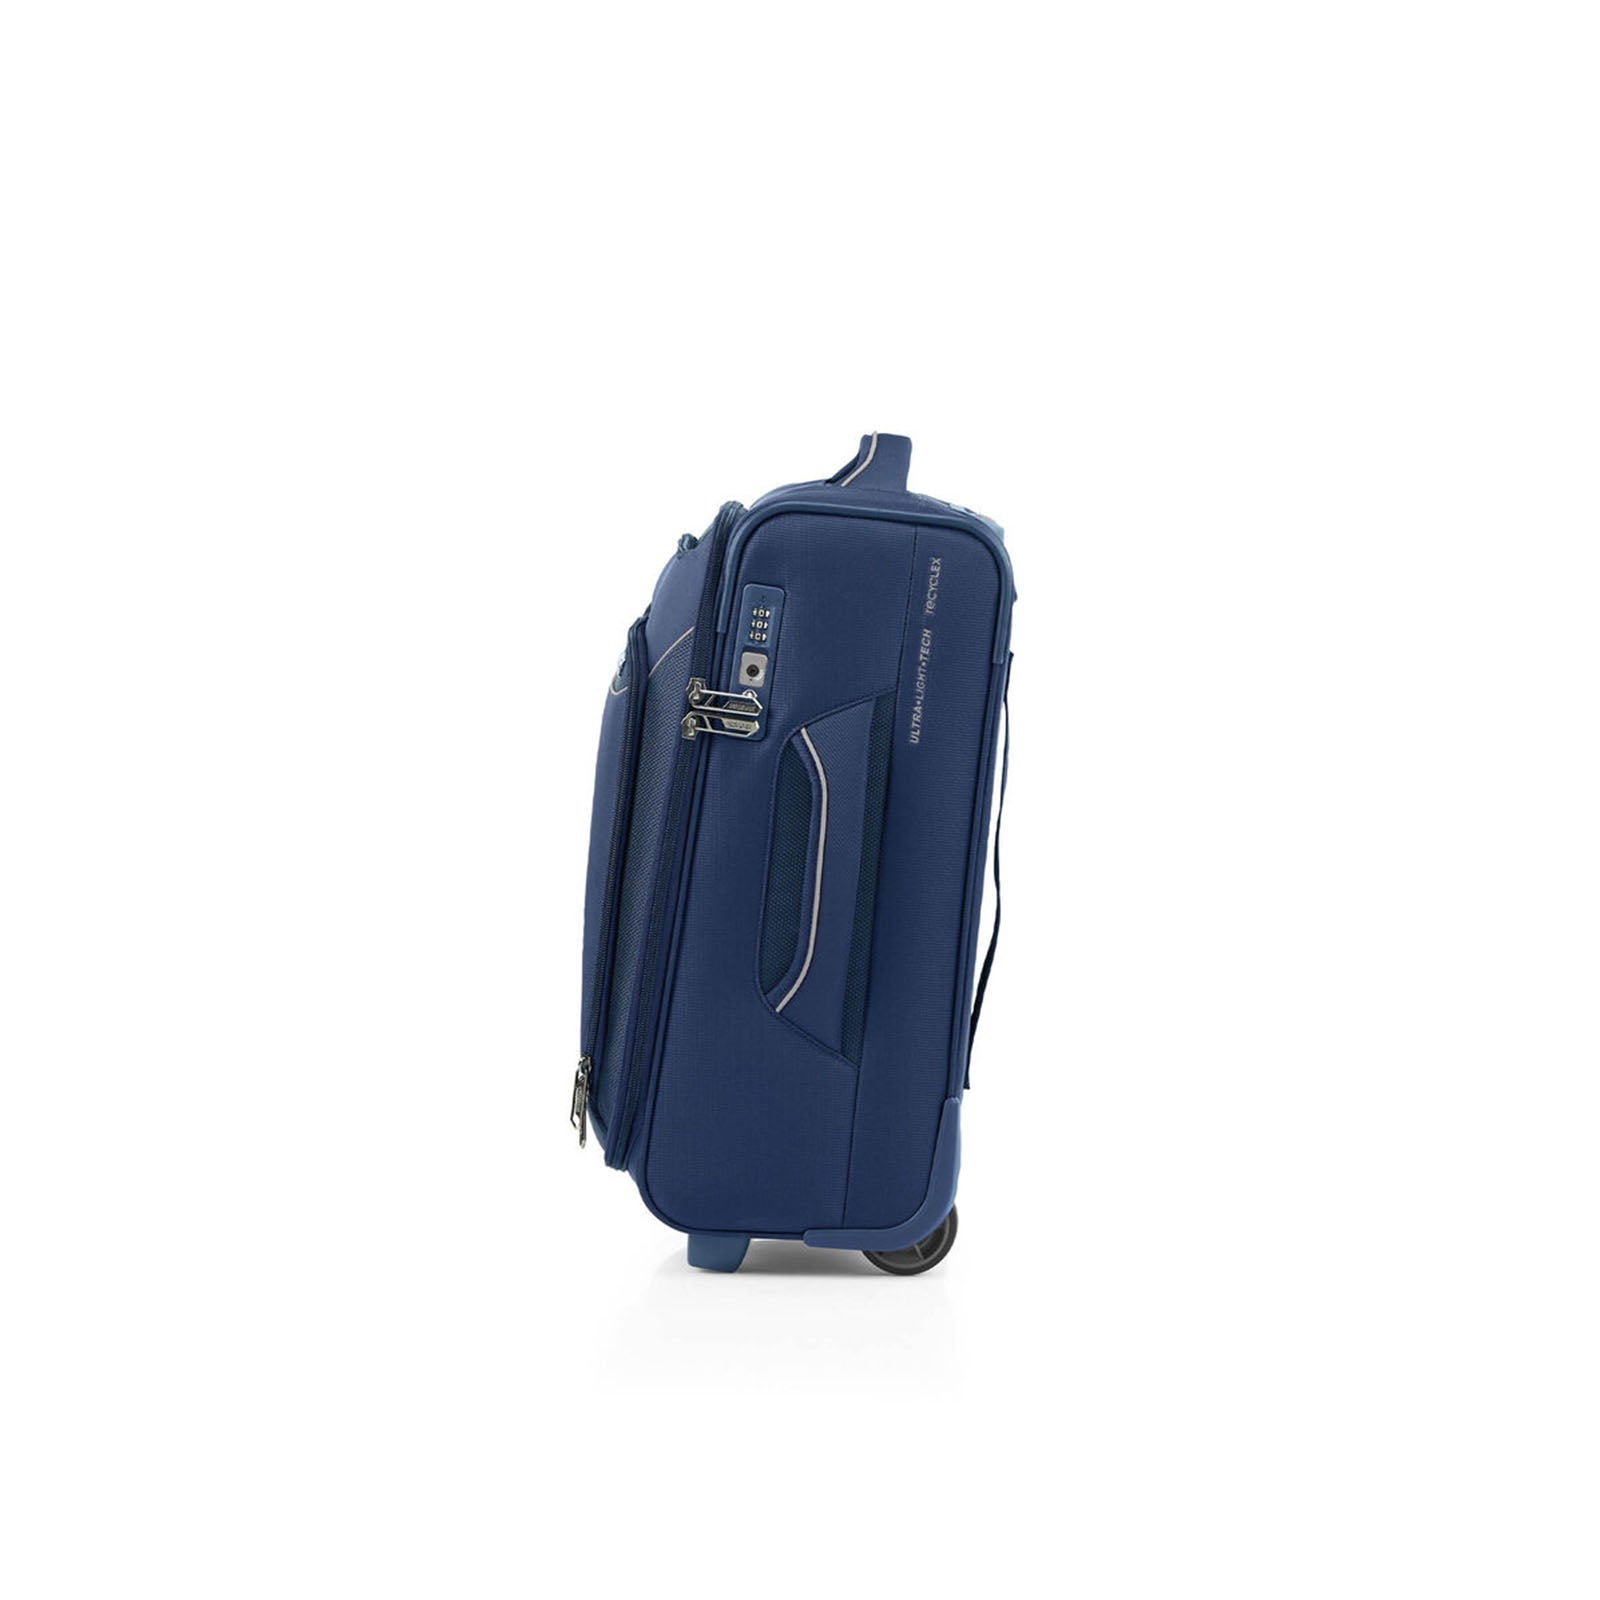 American-Tourister-Applite-4-Eco-50cm-Carry-On-Suitcase-Navy-Lock